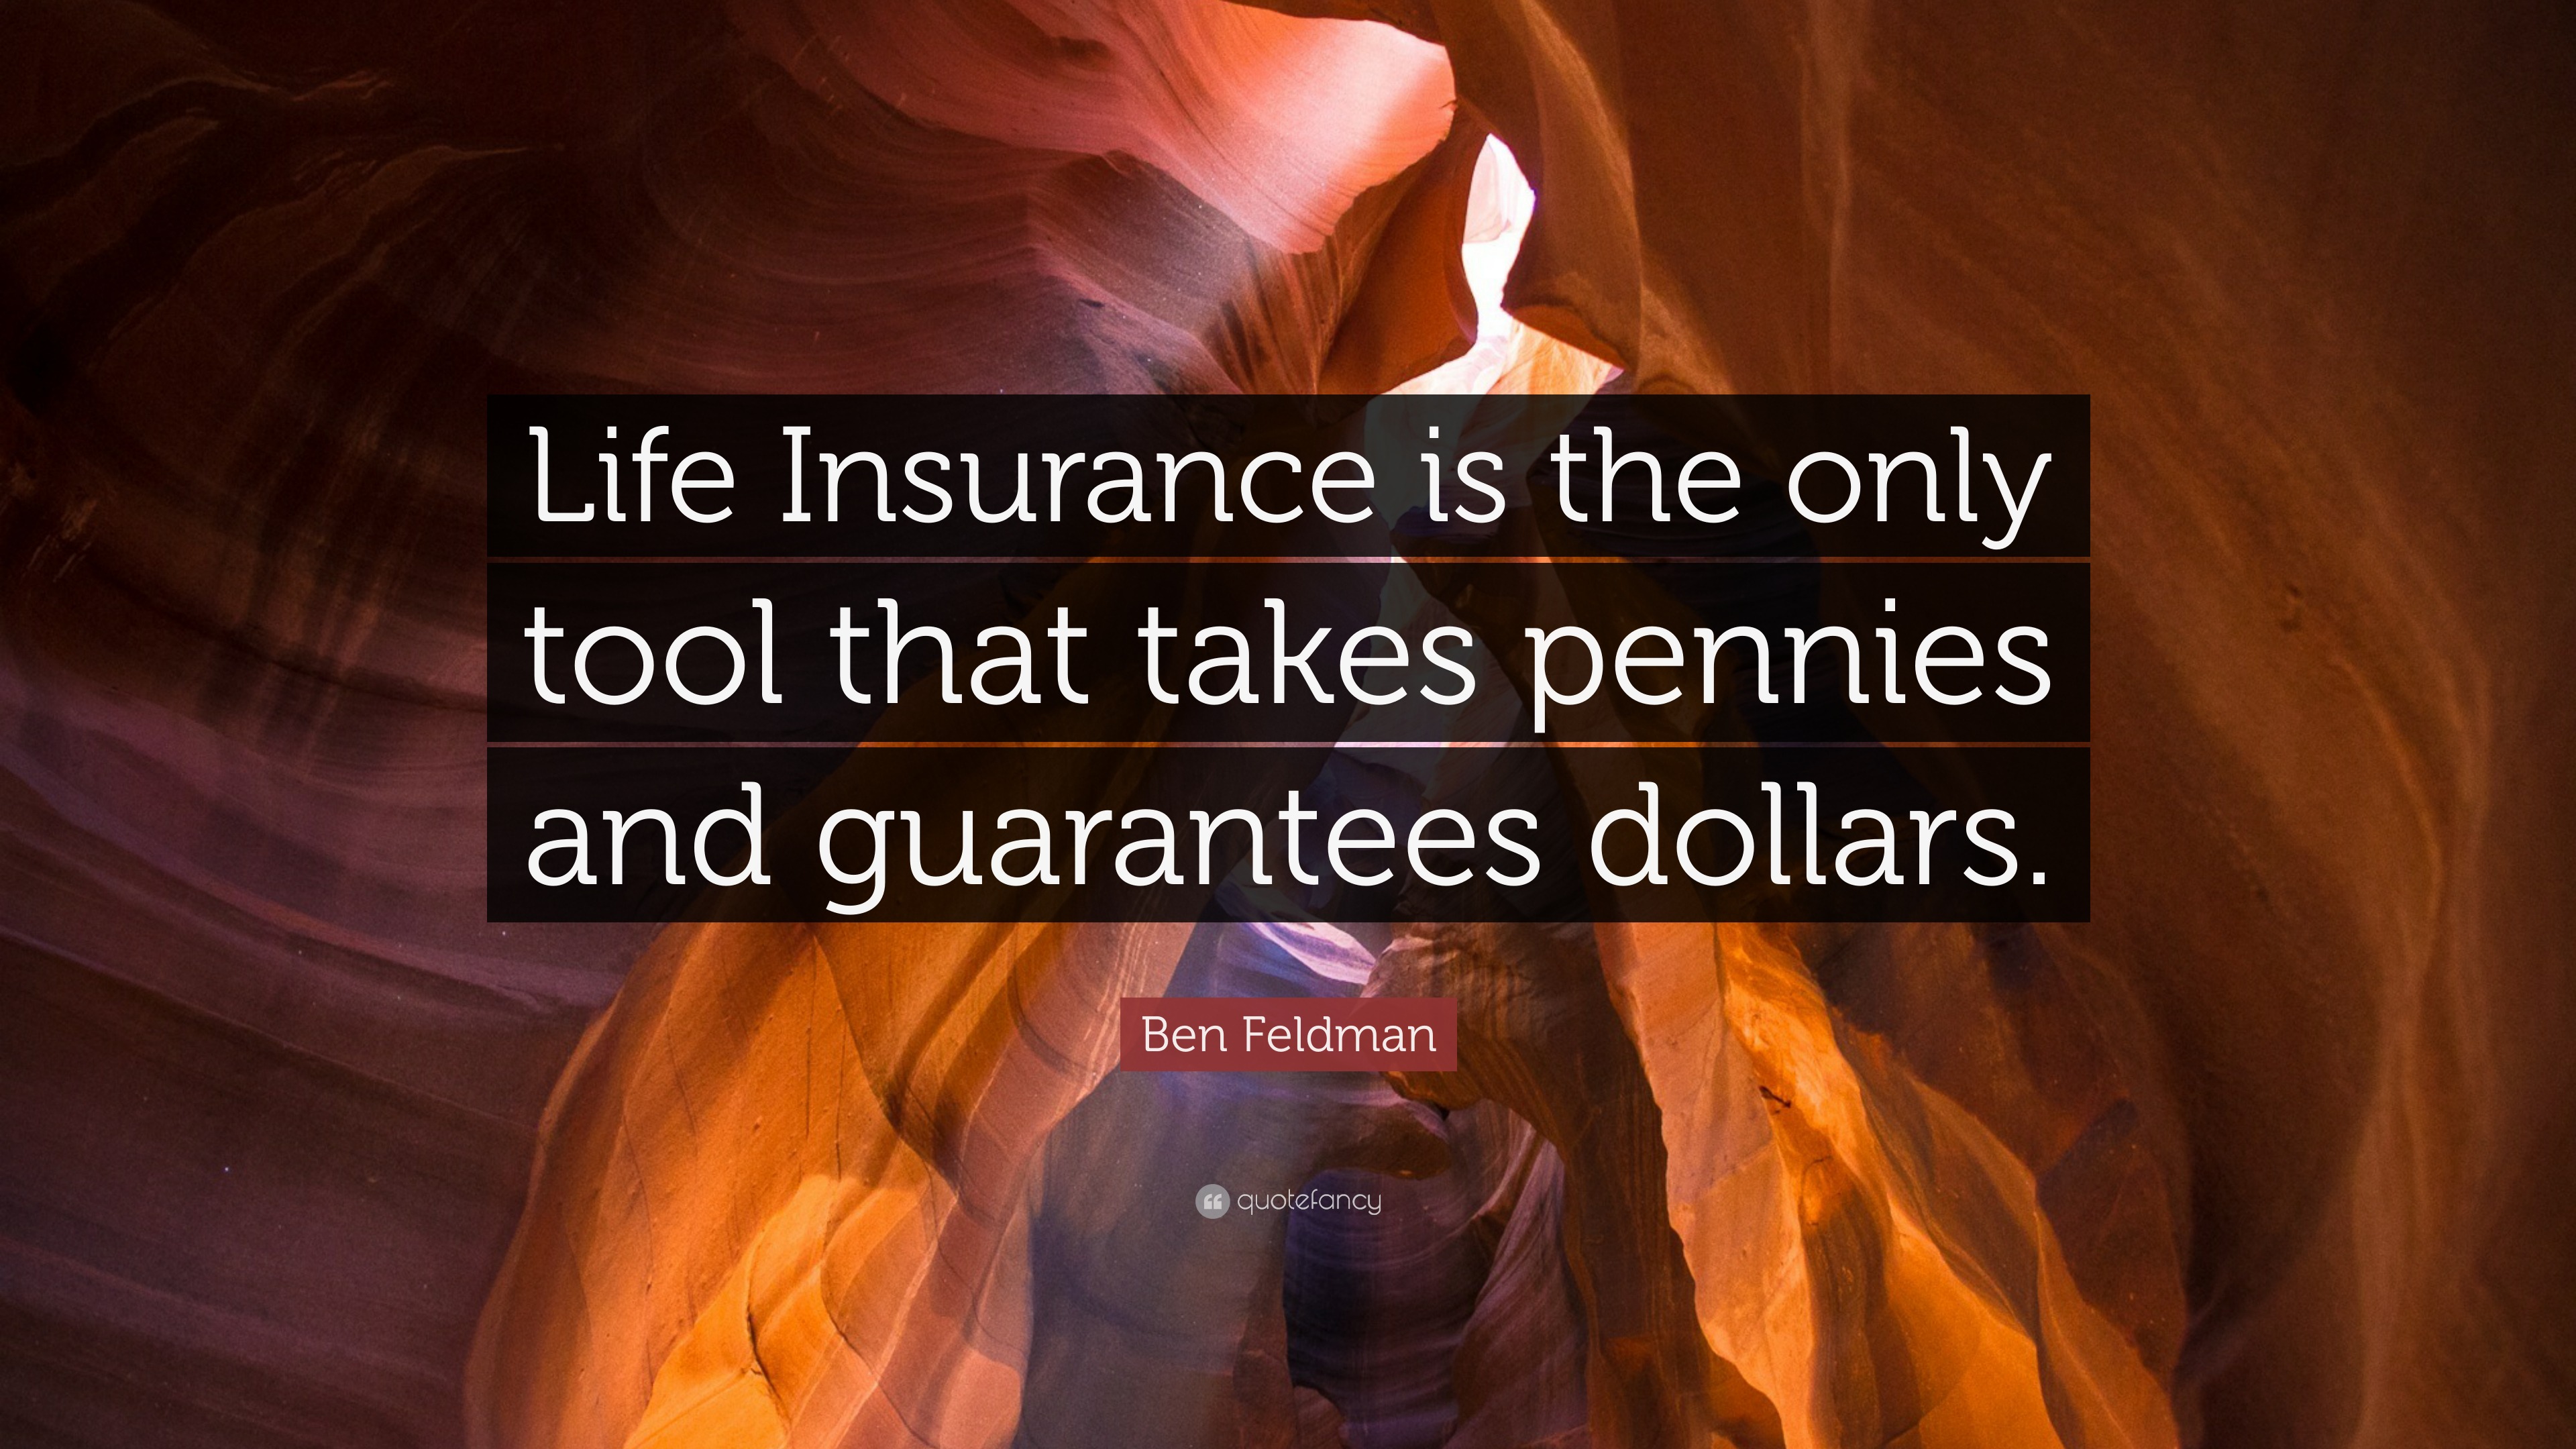 Ben Feldman Quote “Life Insurance is the only tool that takes pennies and guarantees